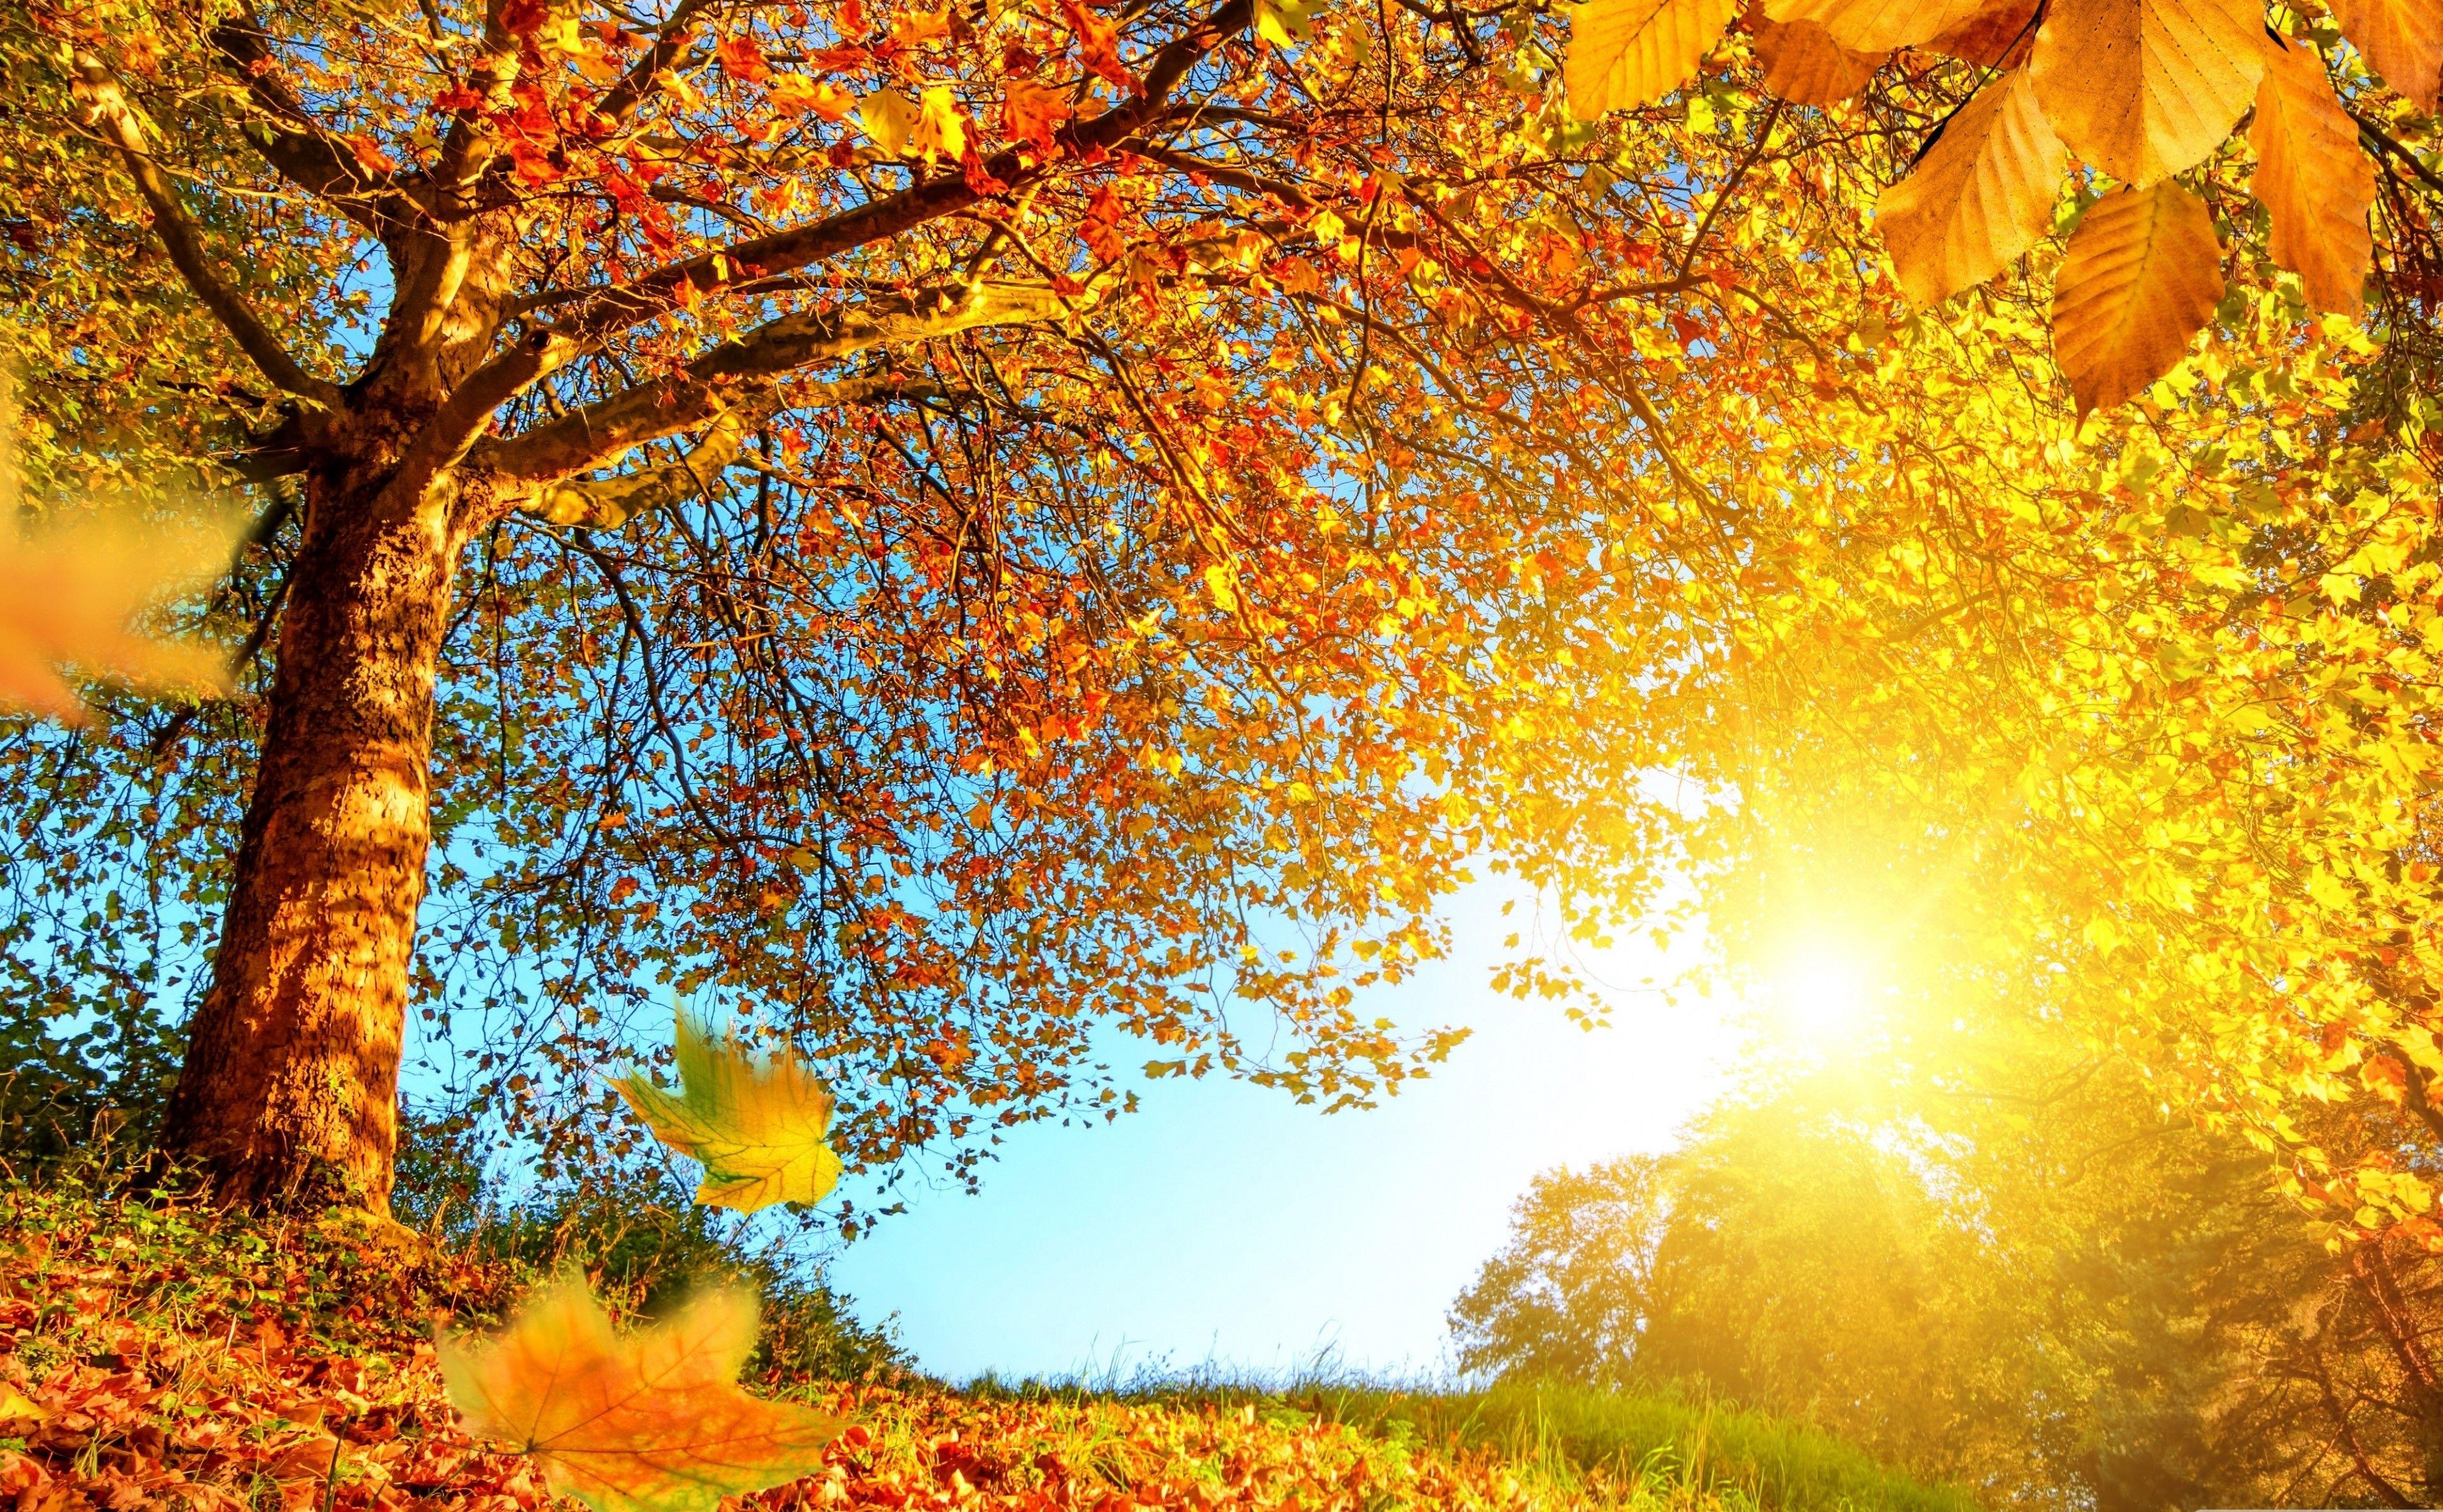 Nature Autumn Yellow Leaves HD Wallpaper & Image Download